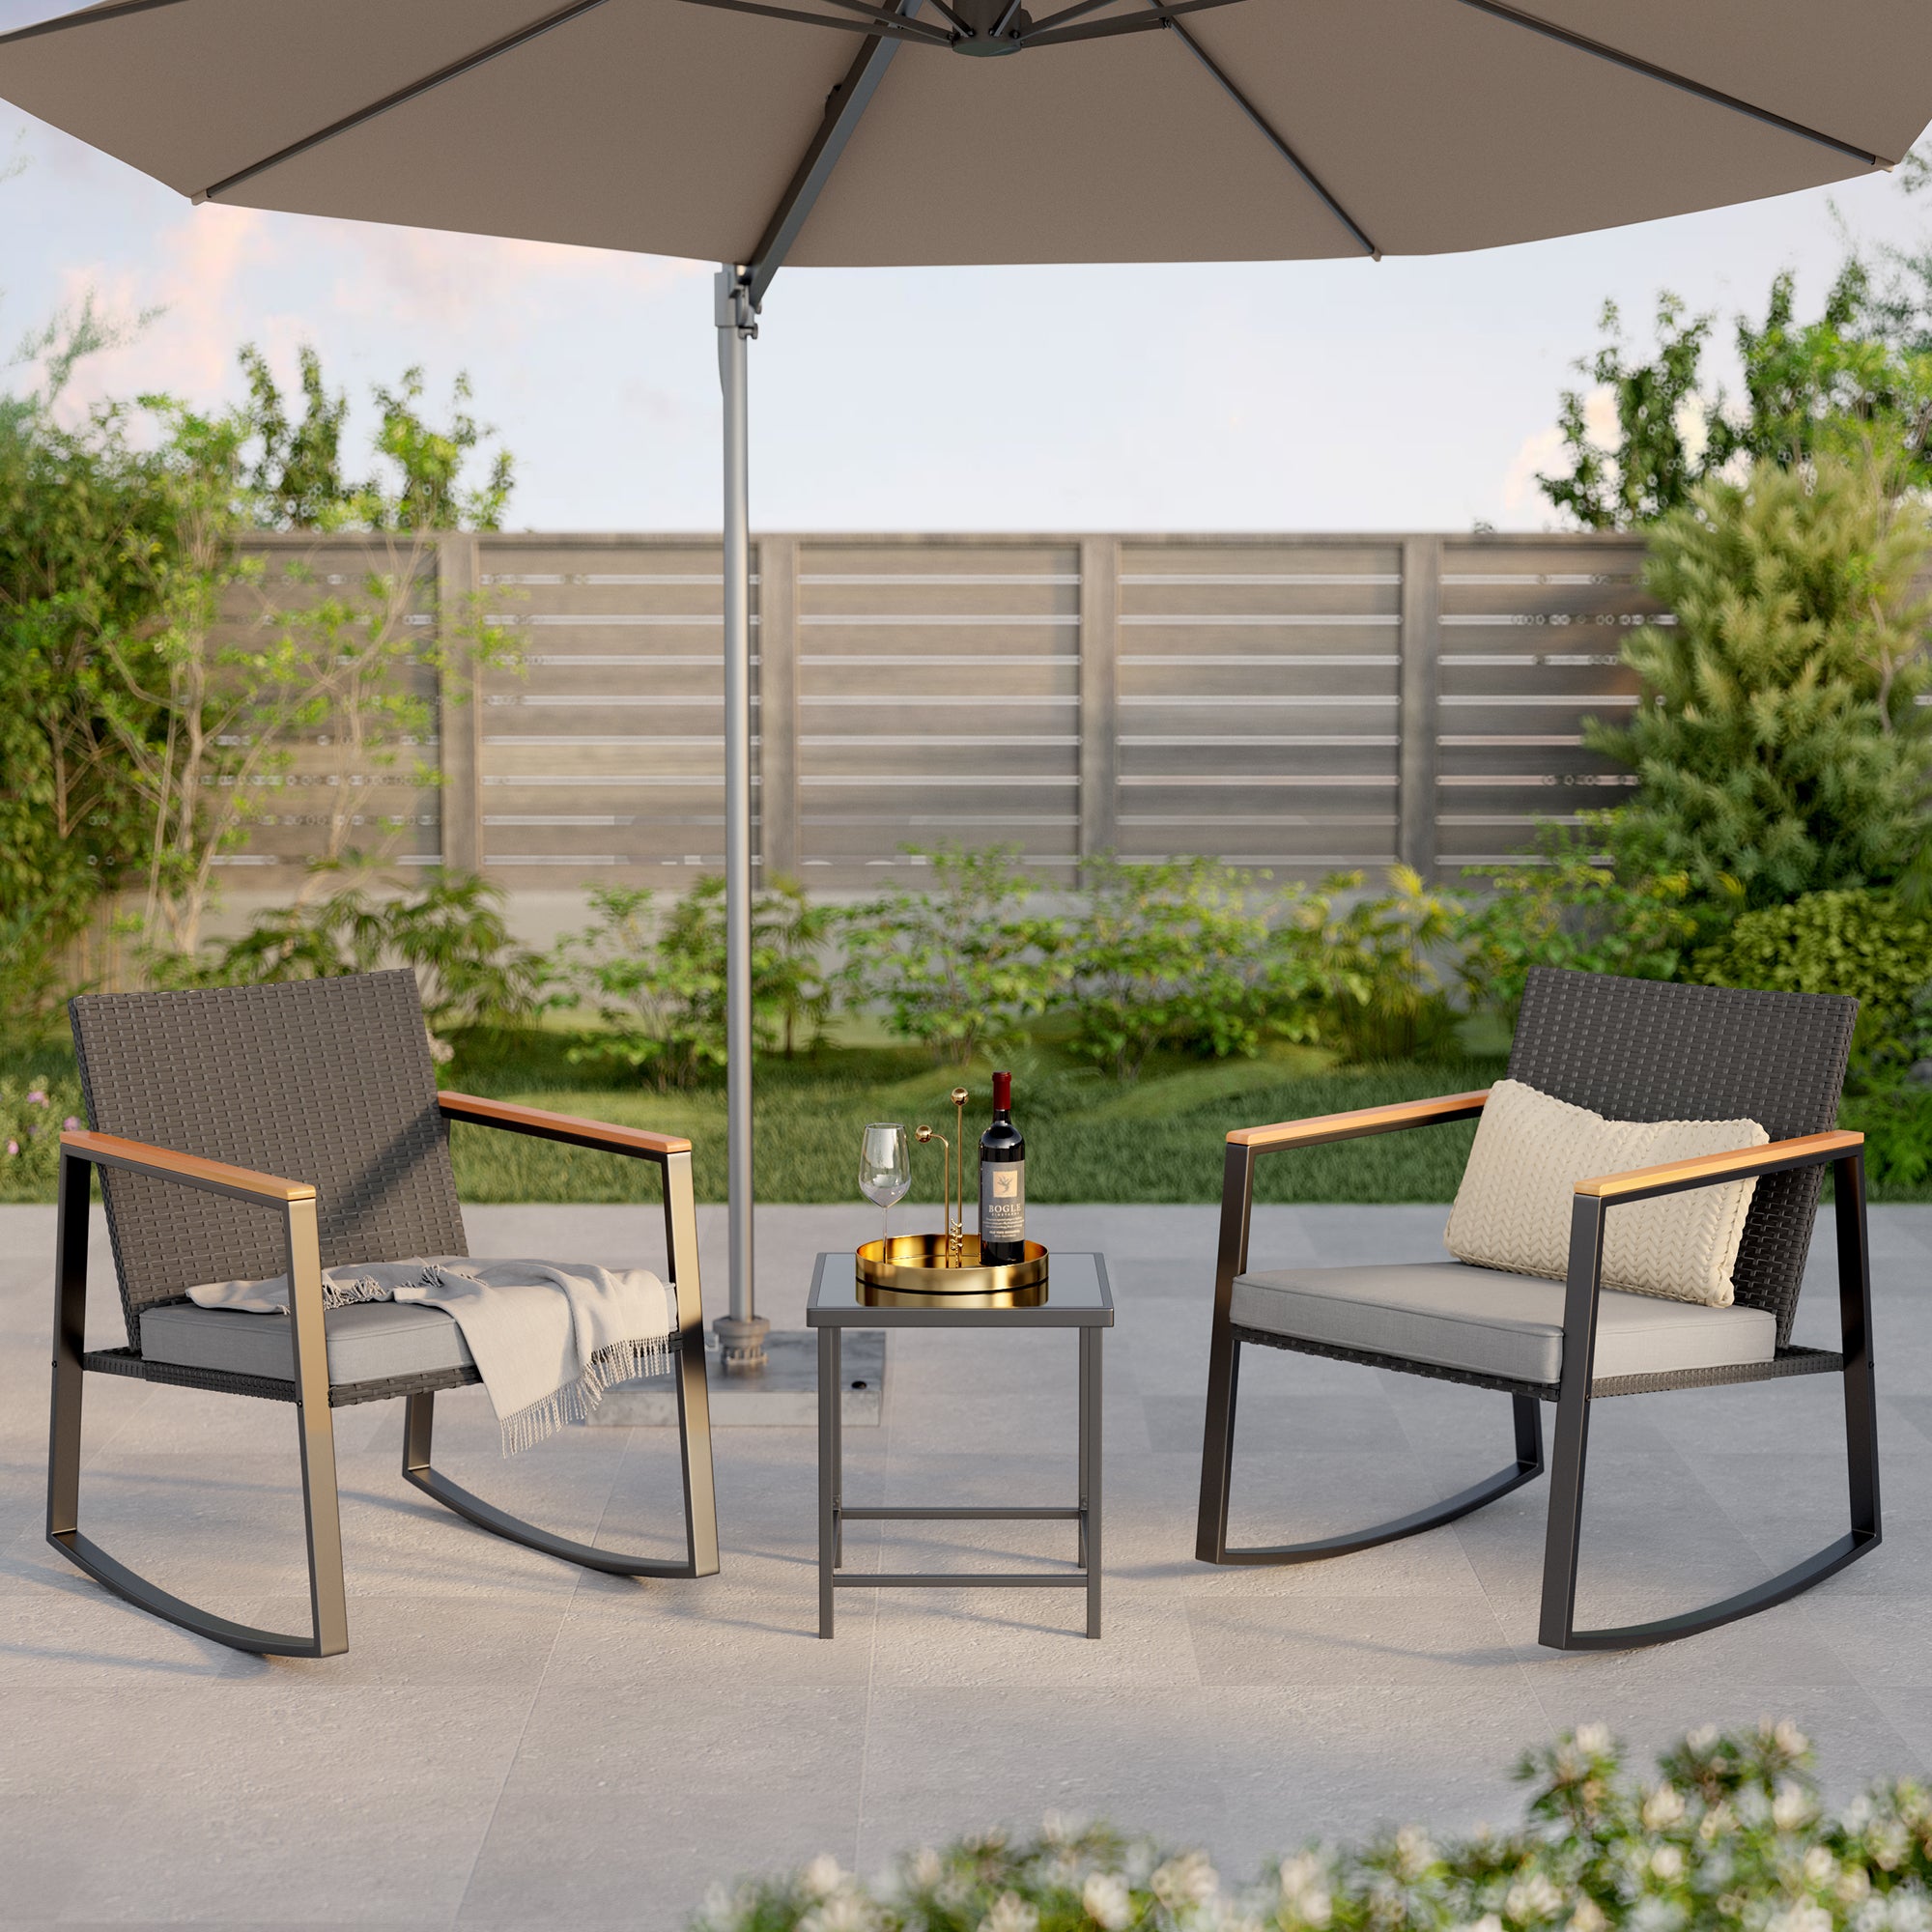 Gizoon WR211 3-Pieces Rocking Patio Bistro Set with Anti-Scald Armrest